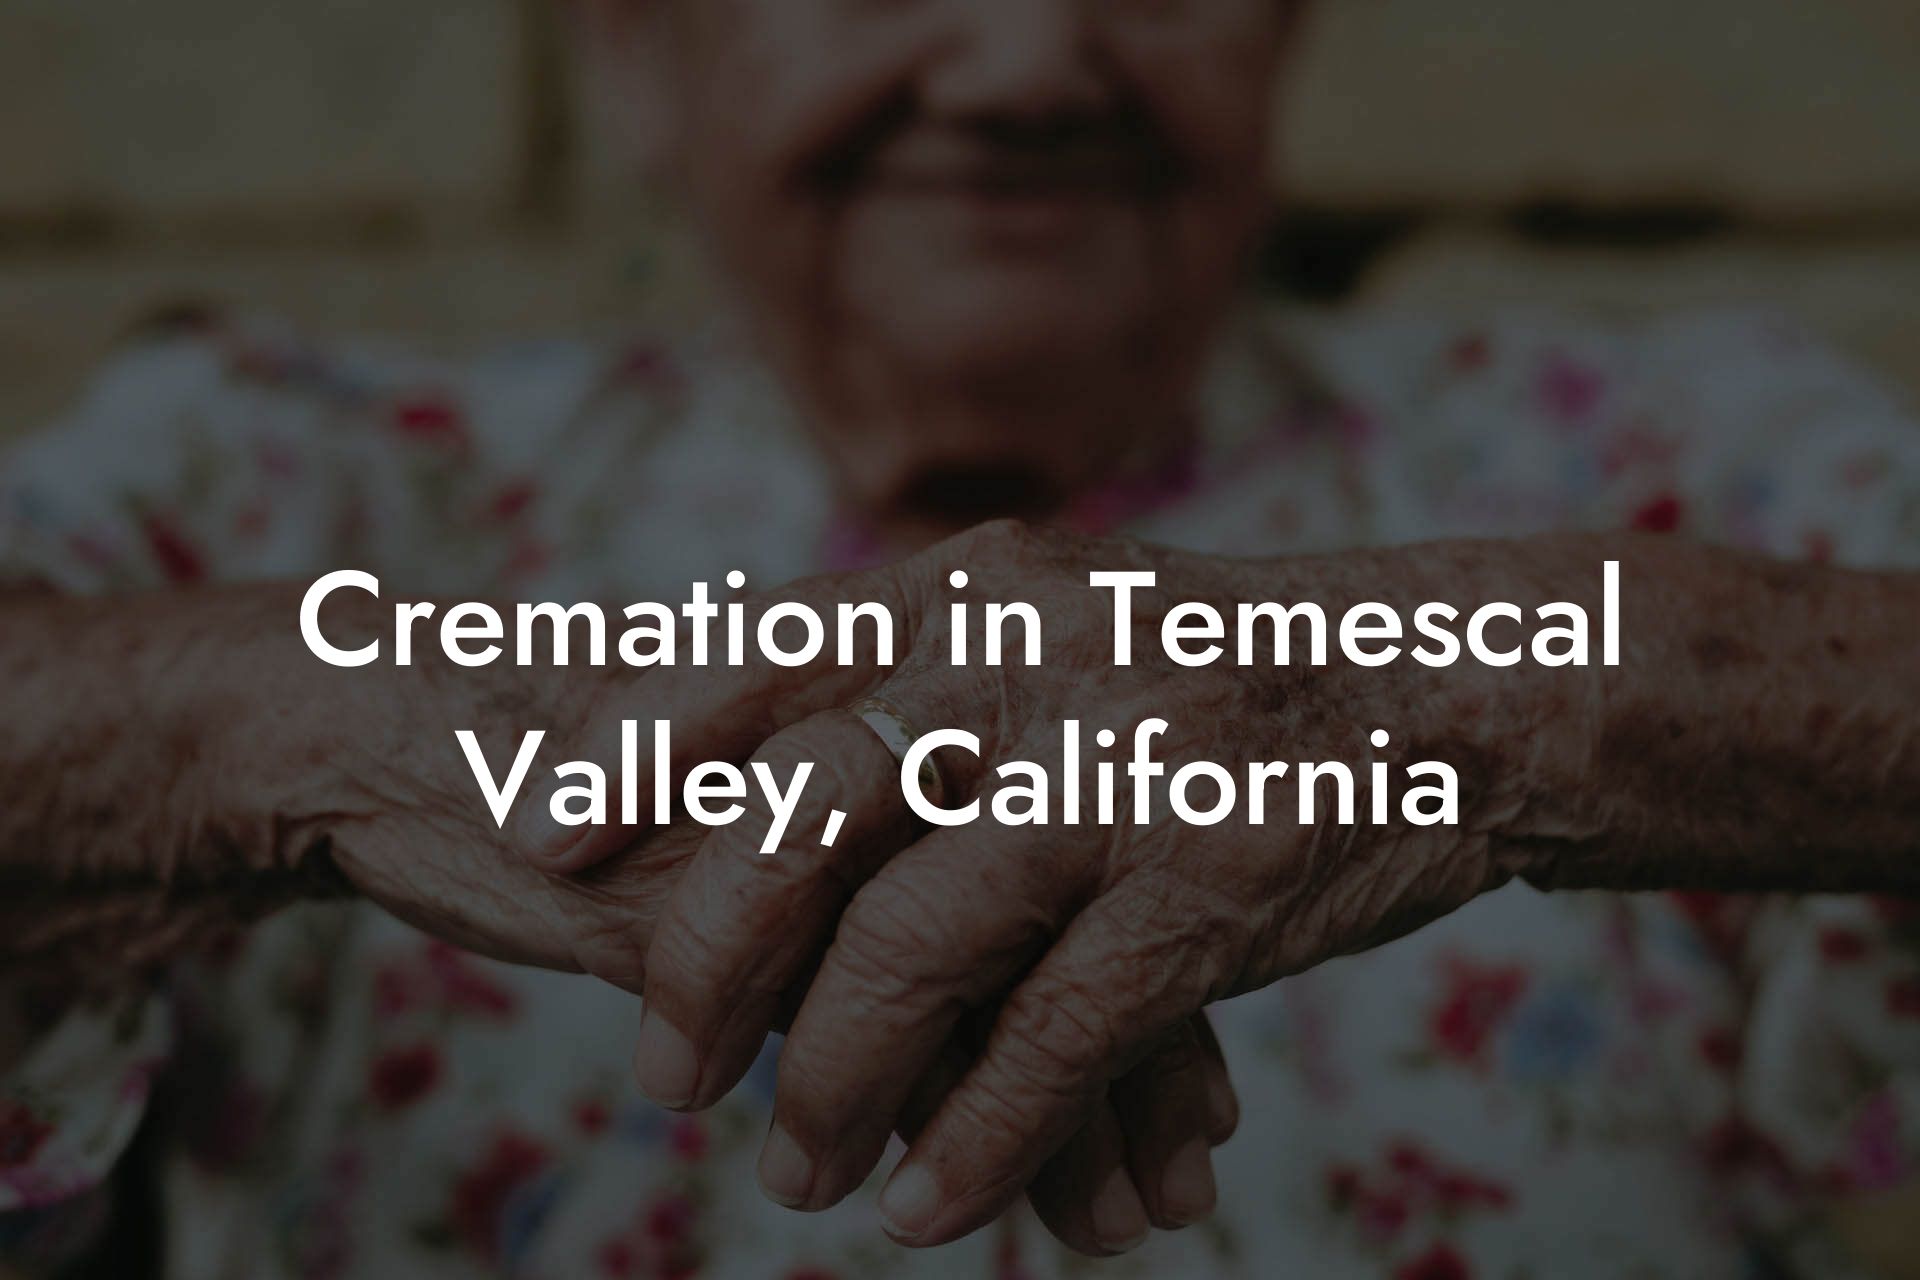 Cremation in Temescal Valley, California